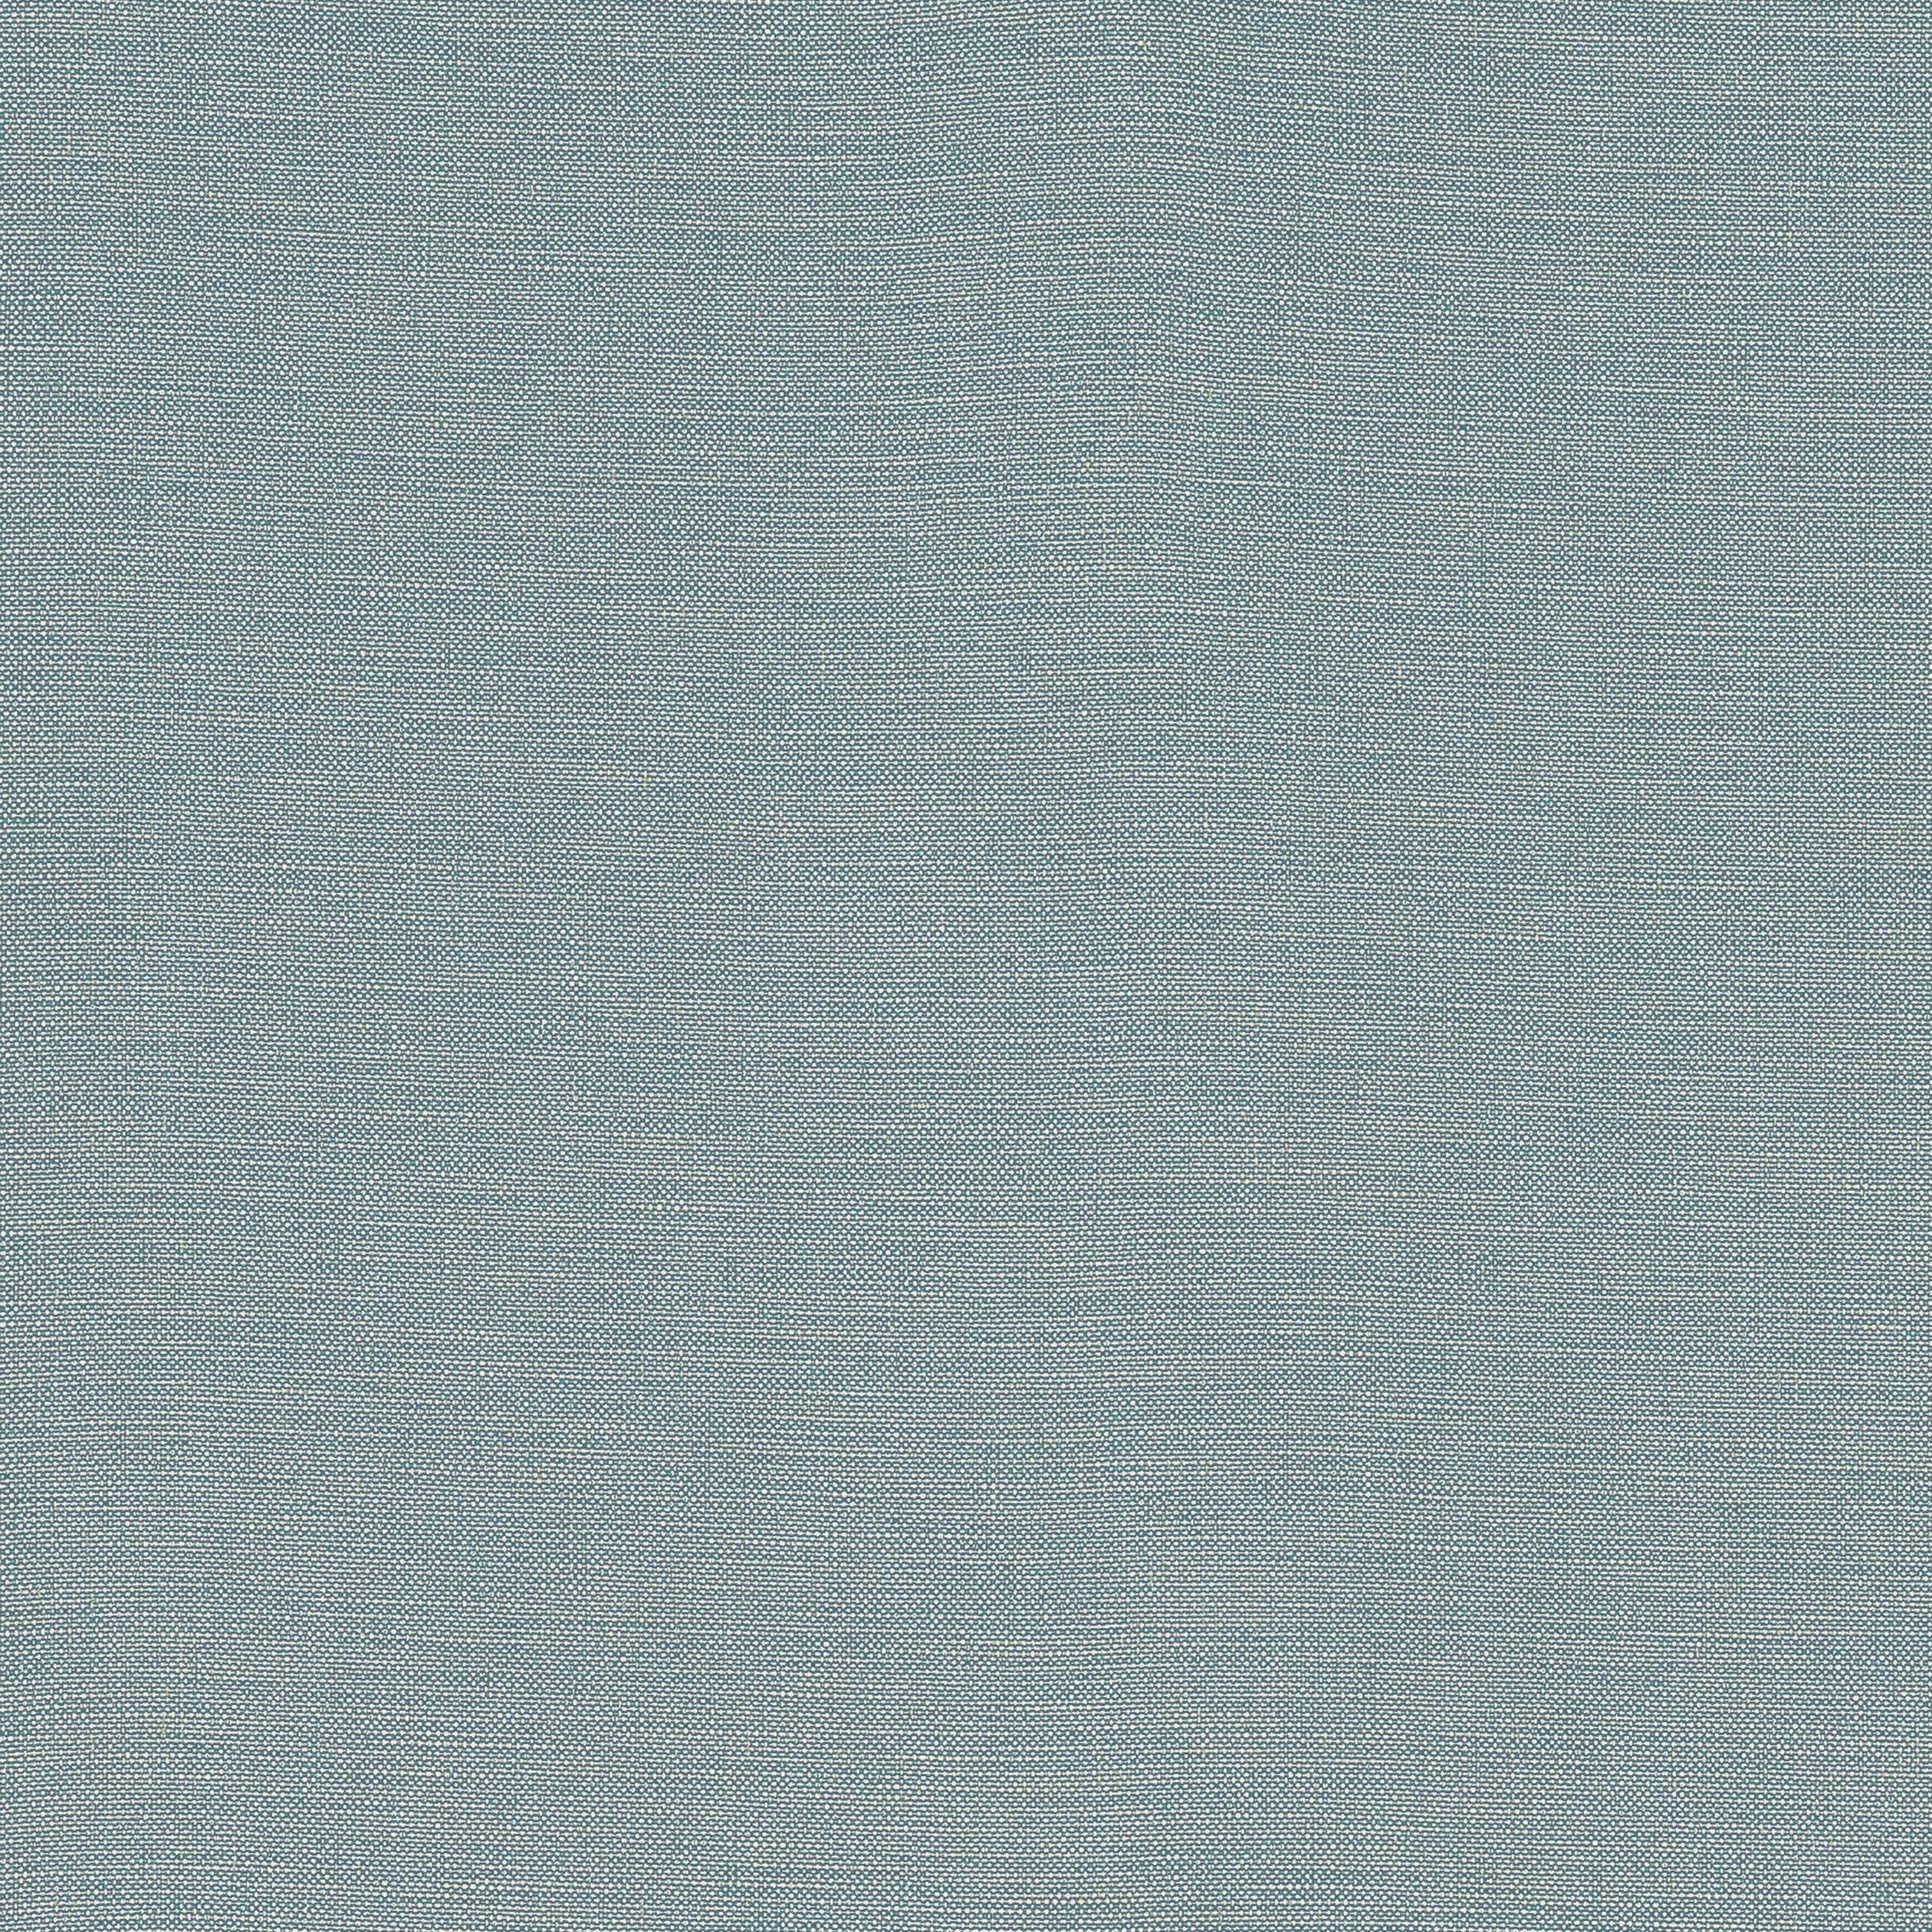 Finley fabric in teal color - pattern number W81618 - by Thibaut in the Locale collection